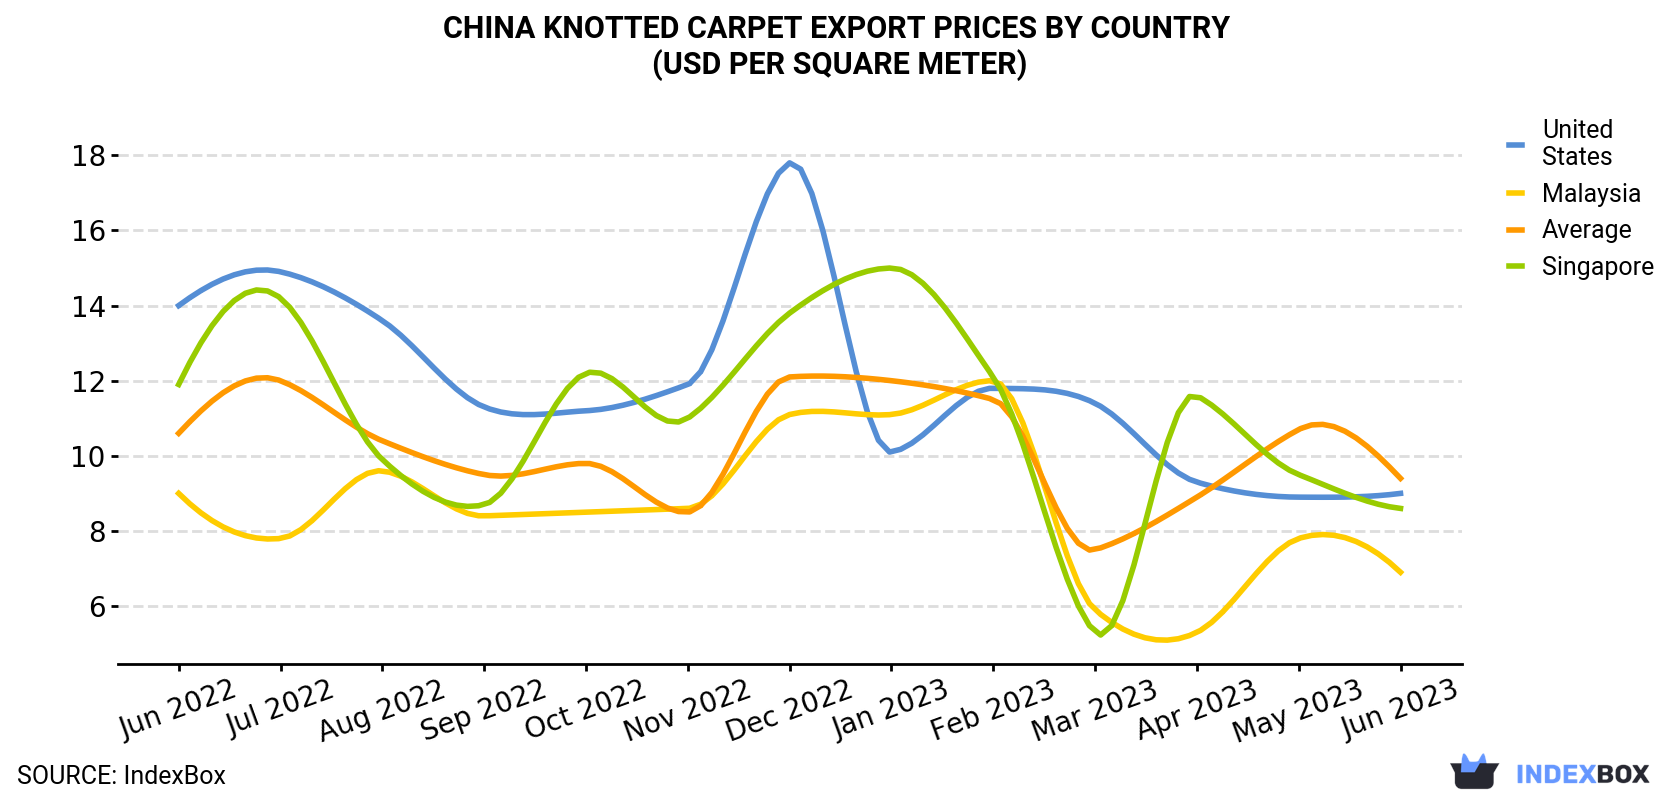 China Knotted Carpet Export Prices By Country (USD Per Square Meter)